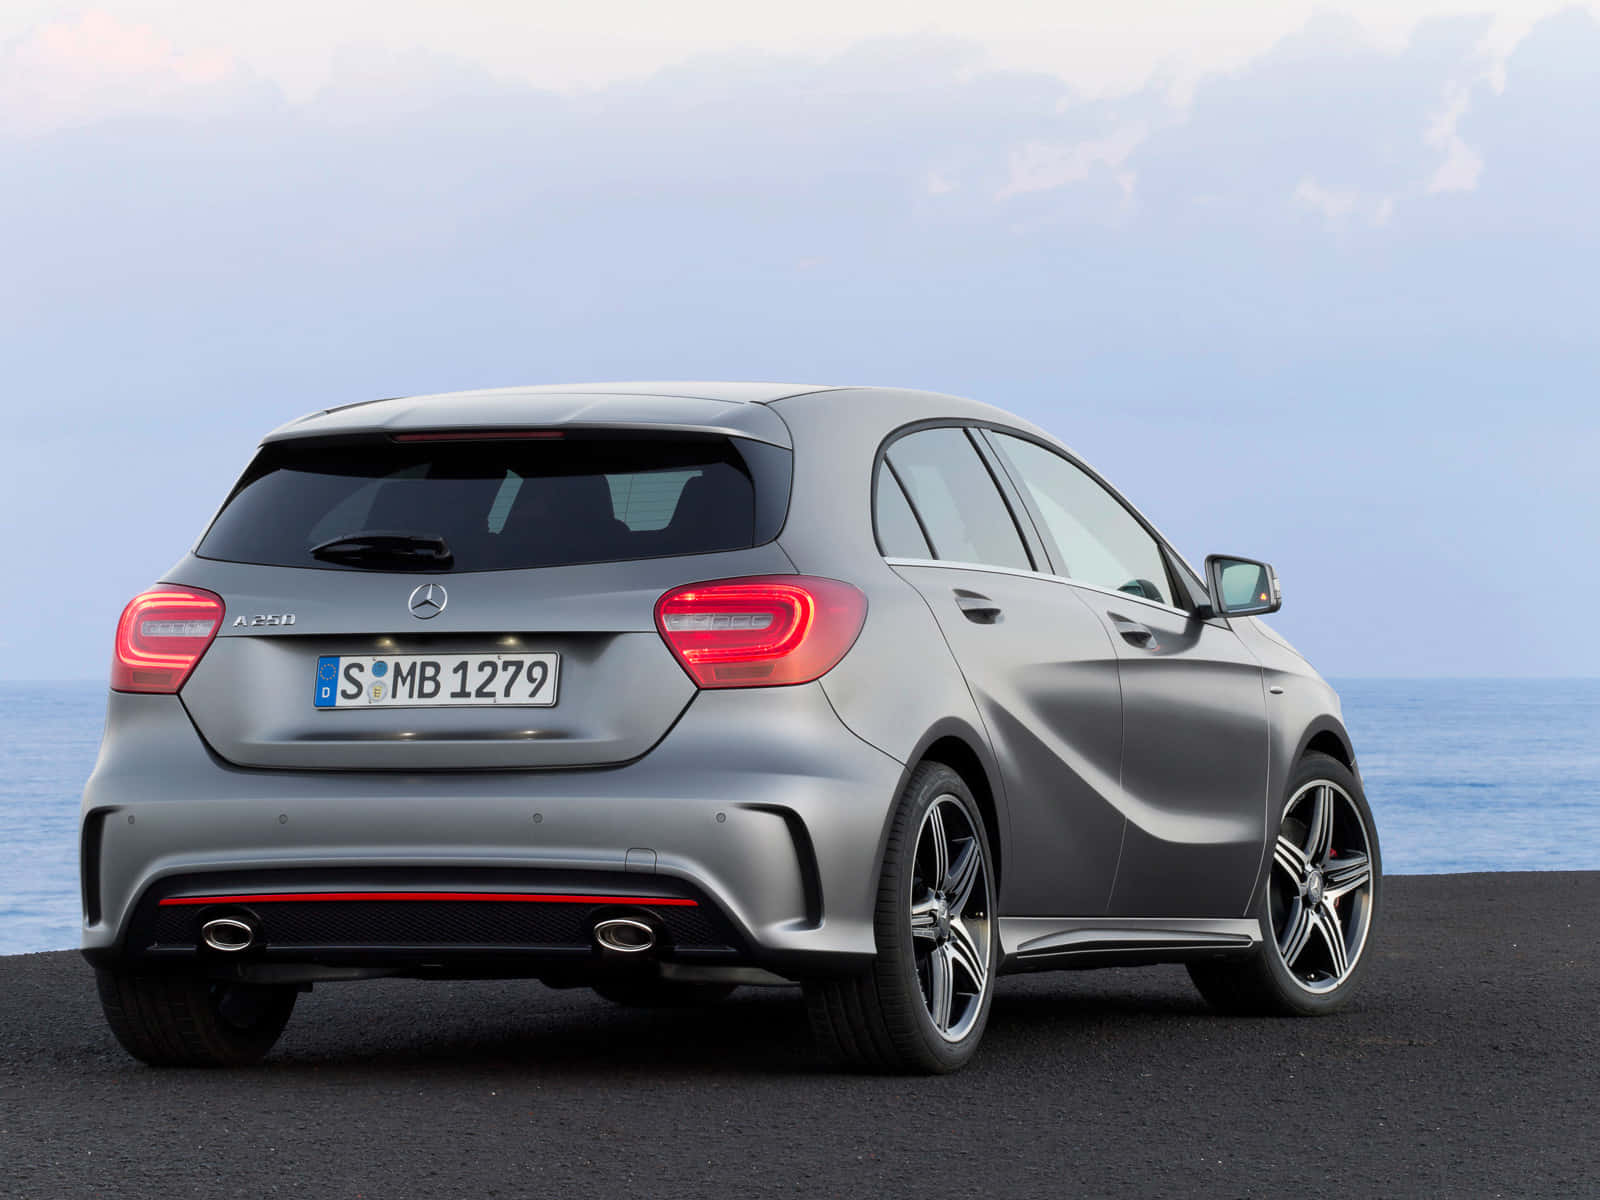 Sleek and Stylish Mercedes Benz A-Class on the road Wallpaper